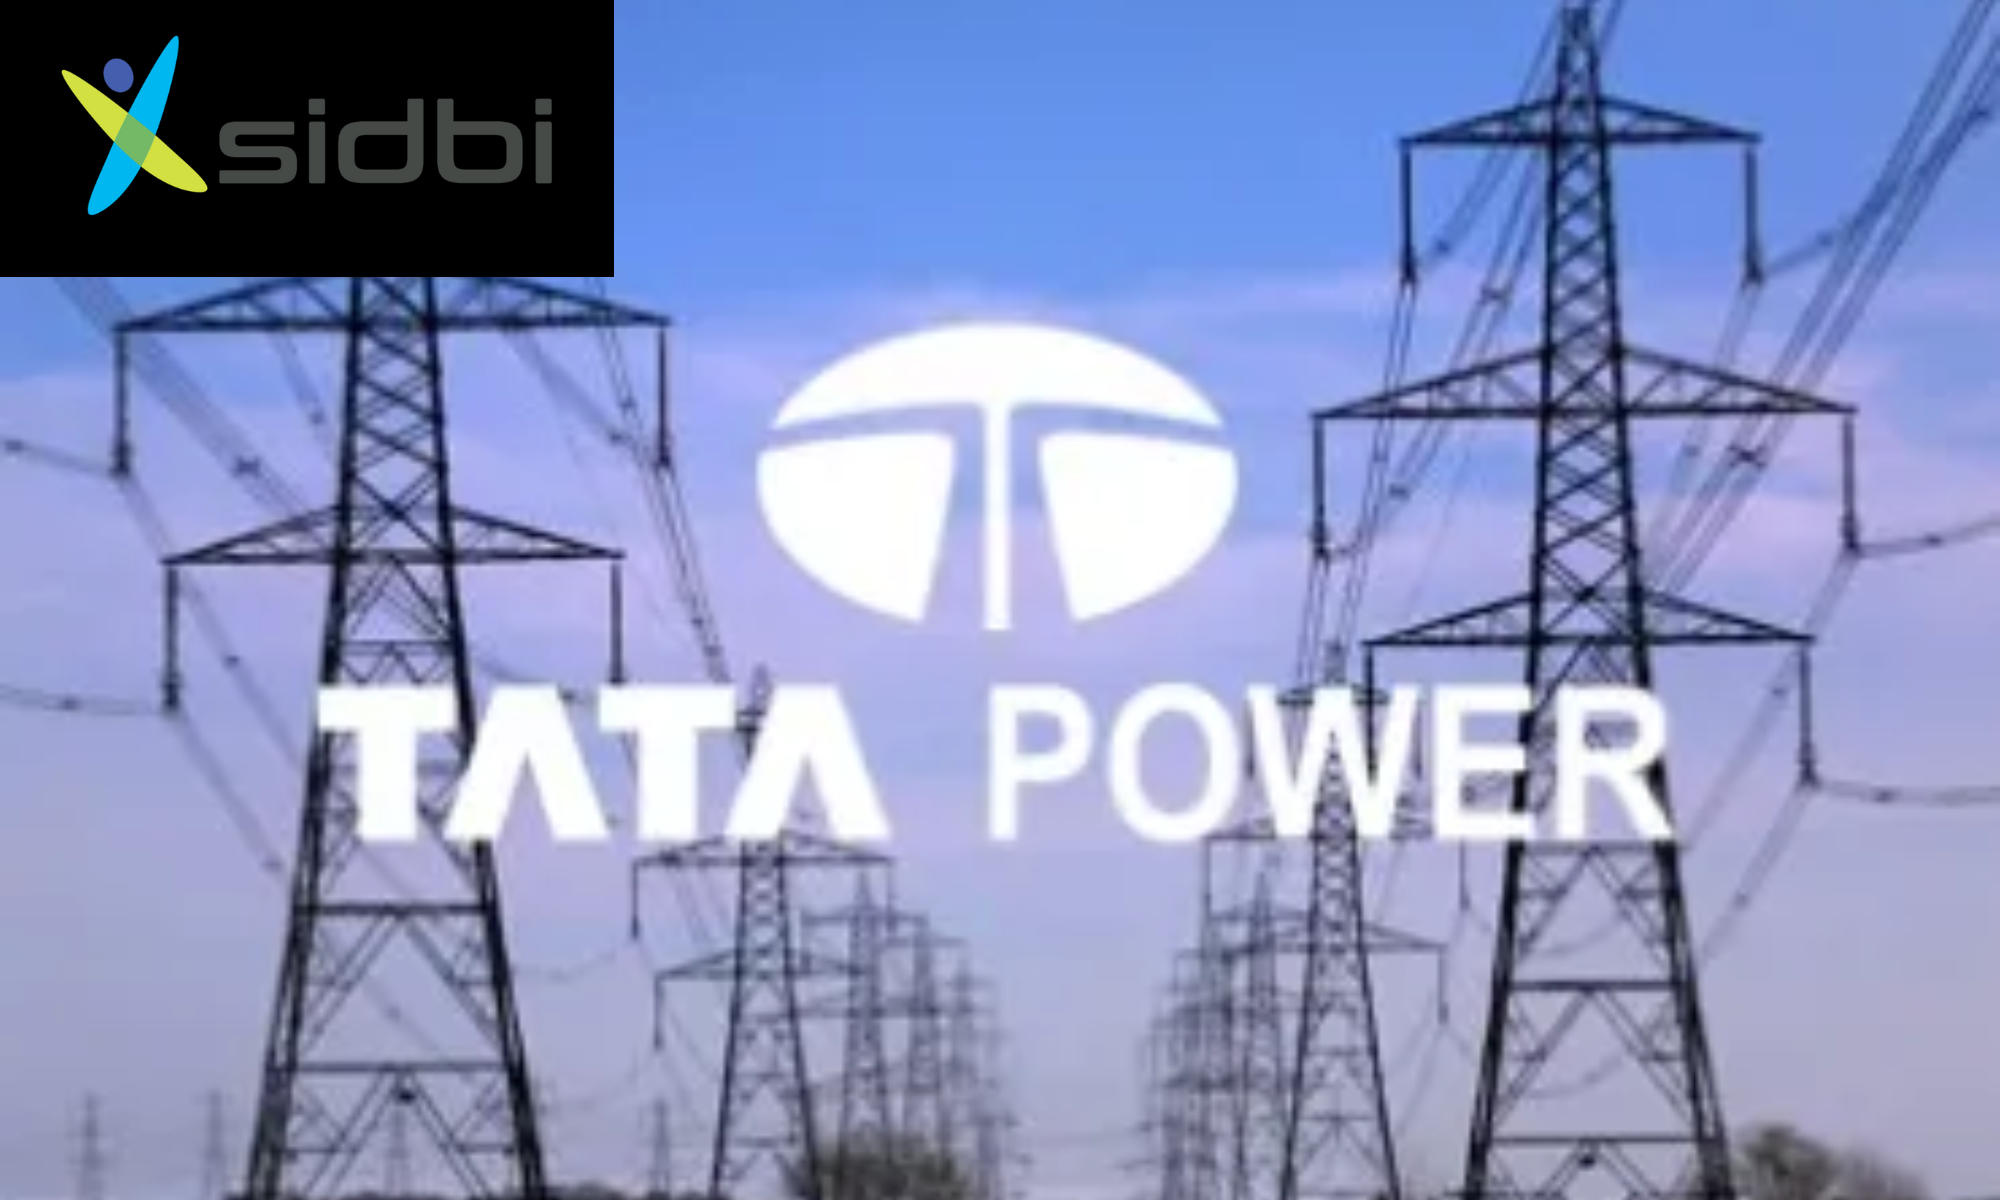 SIDBI and Tata Power's TPRMG collaborated to support green entrepreneurs_30.1